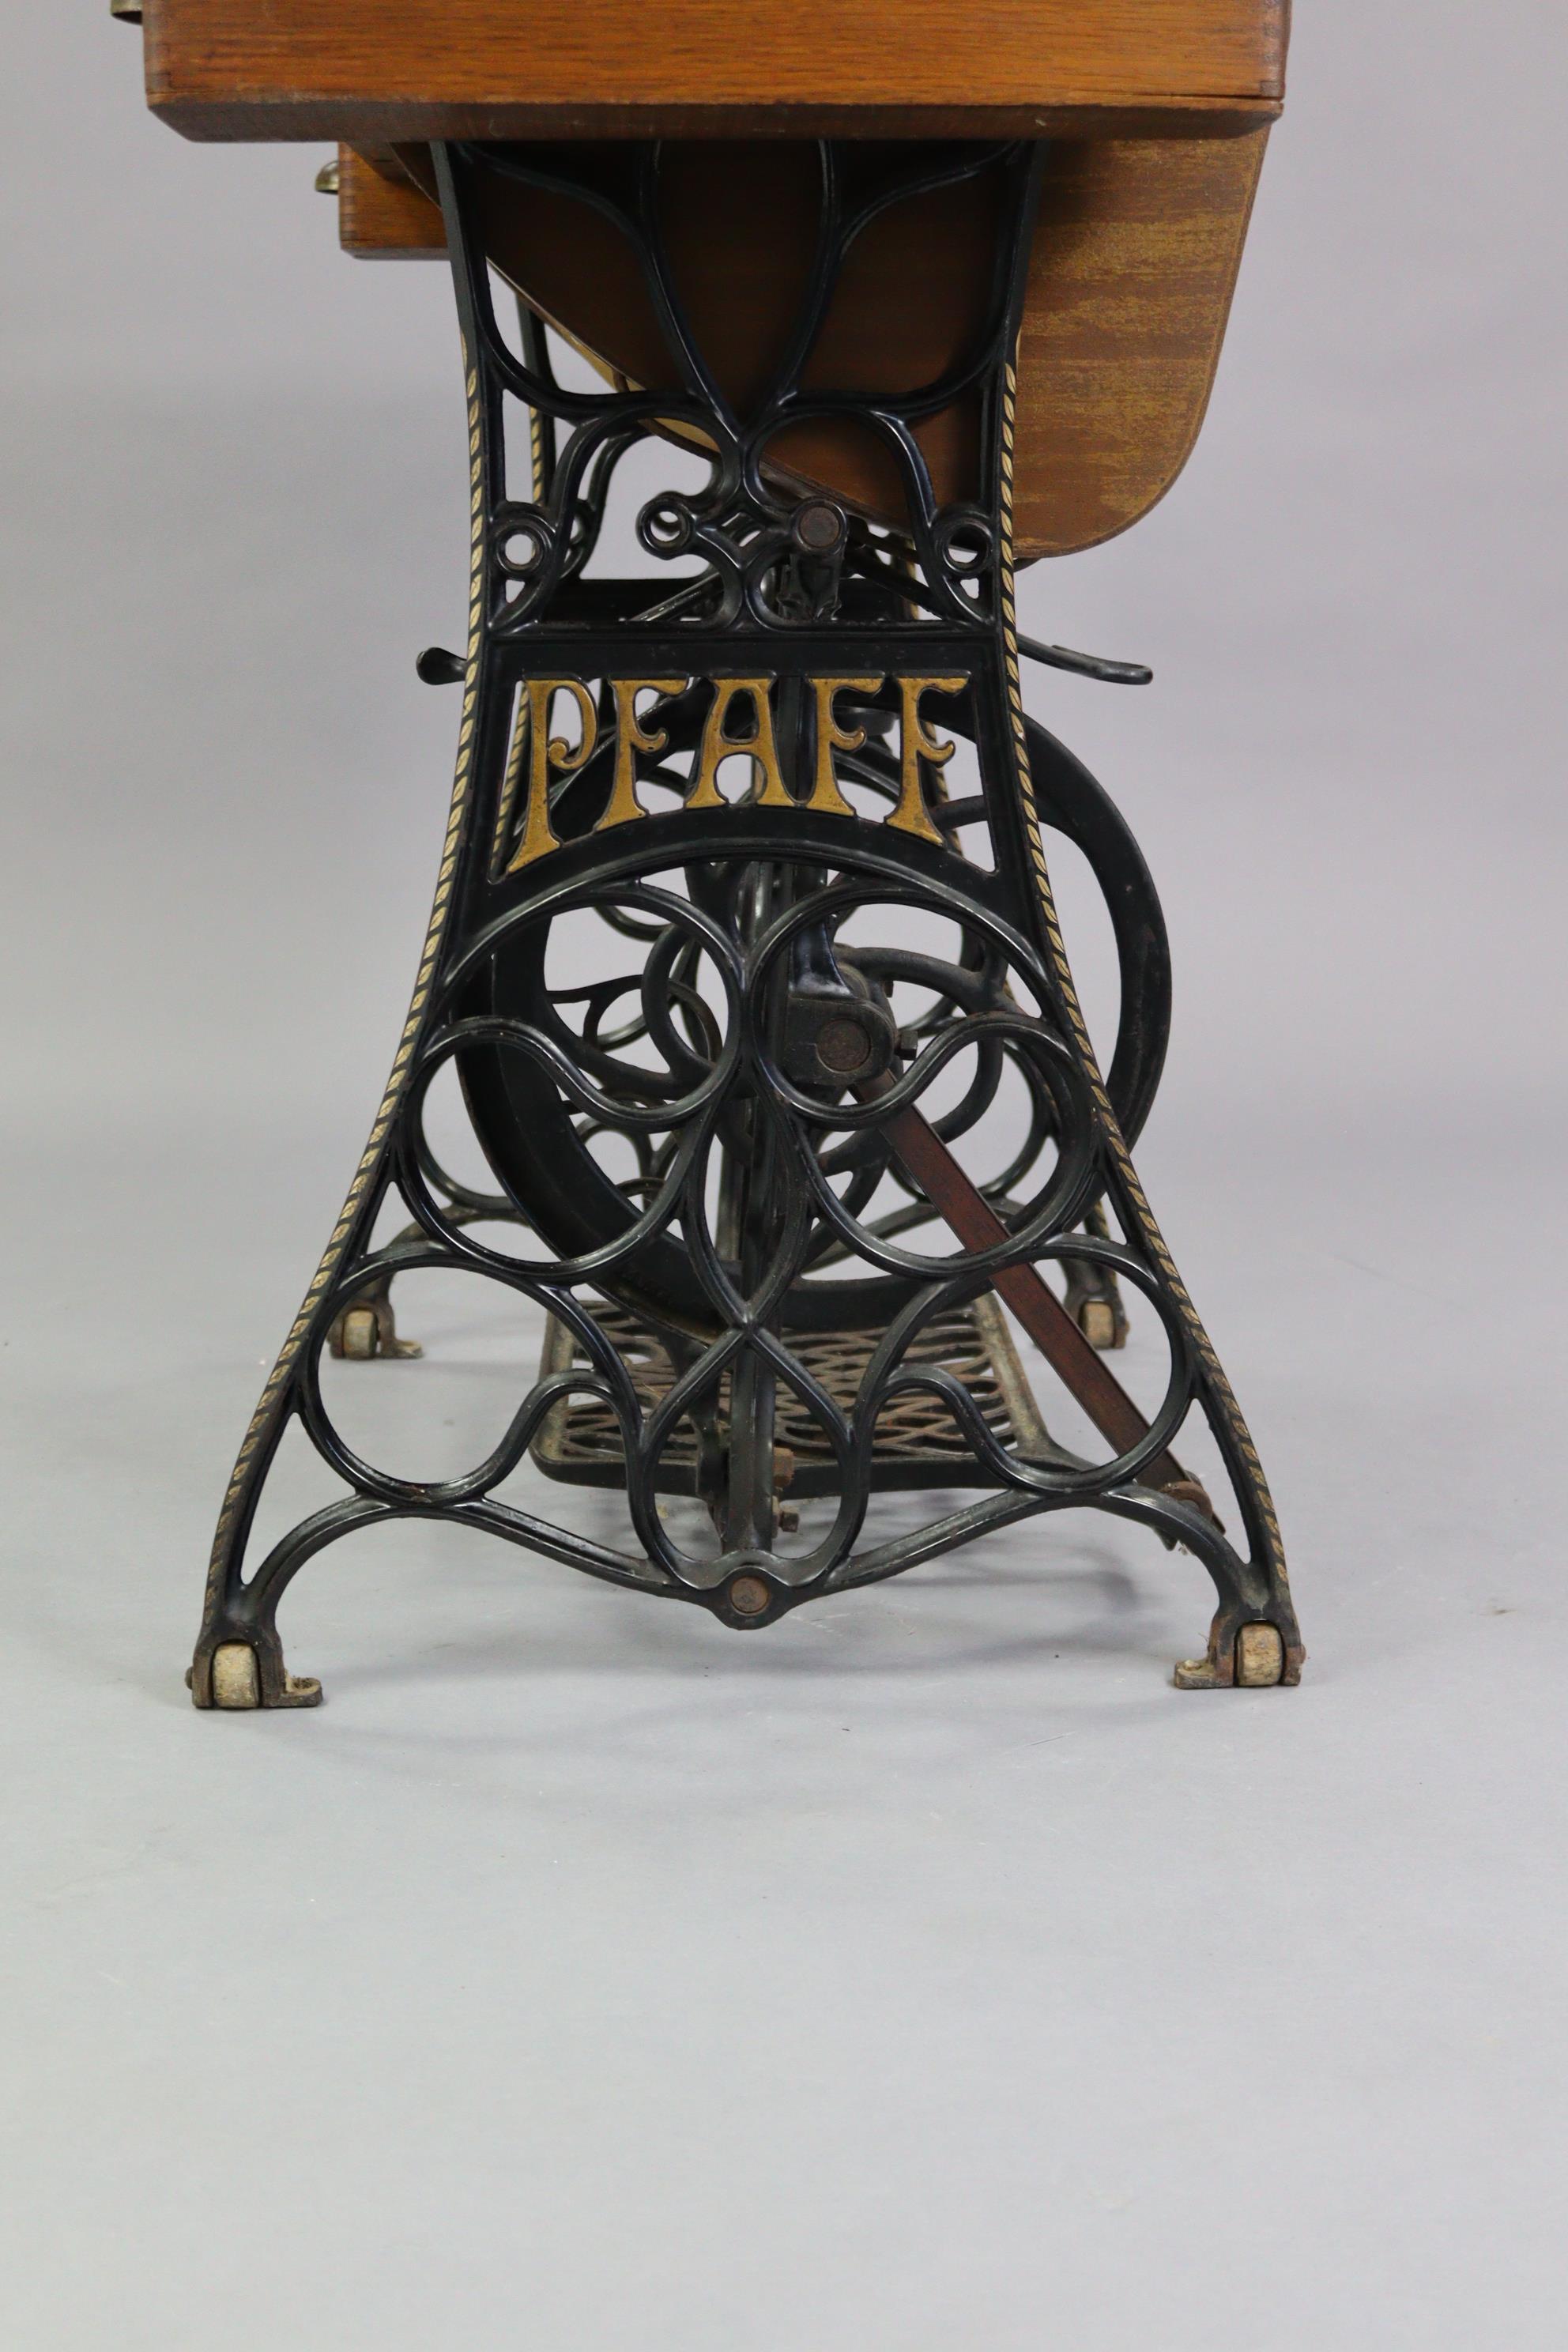 An early 20th century Pfaff treadle sewing machine in oak case, & on cast-iron stand, 37” wide. - Image 7 of 7